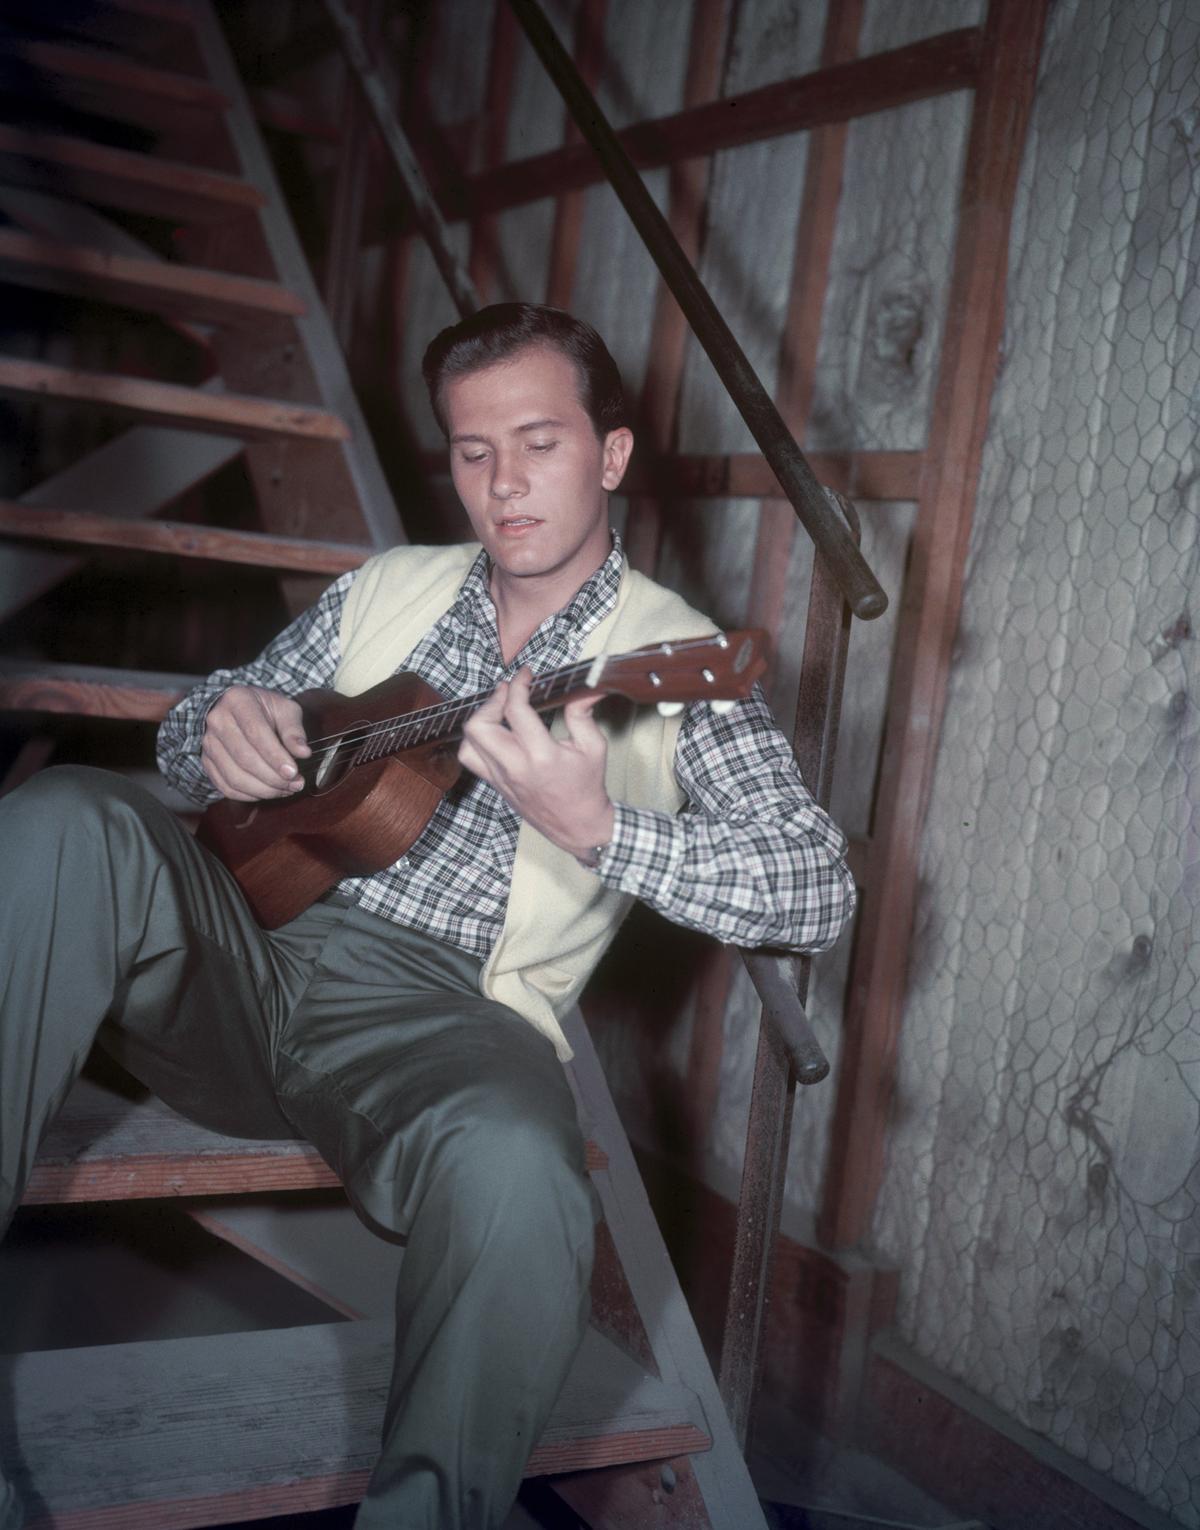 American singer and actor Pat Boone playing the ukulele, circa 1955. (Hulton Archive/Getty Images)